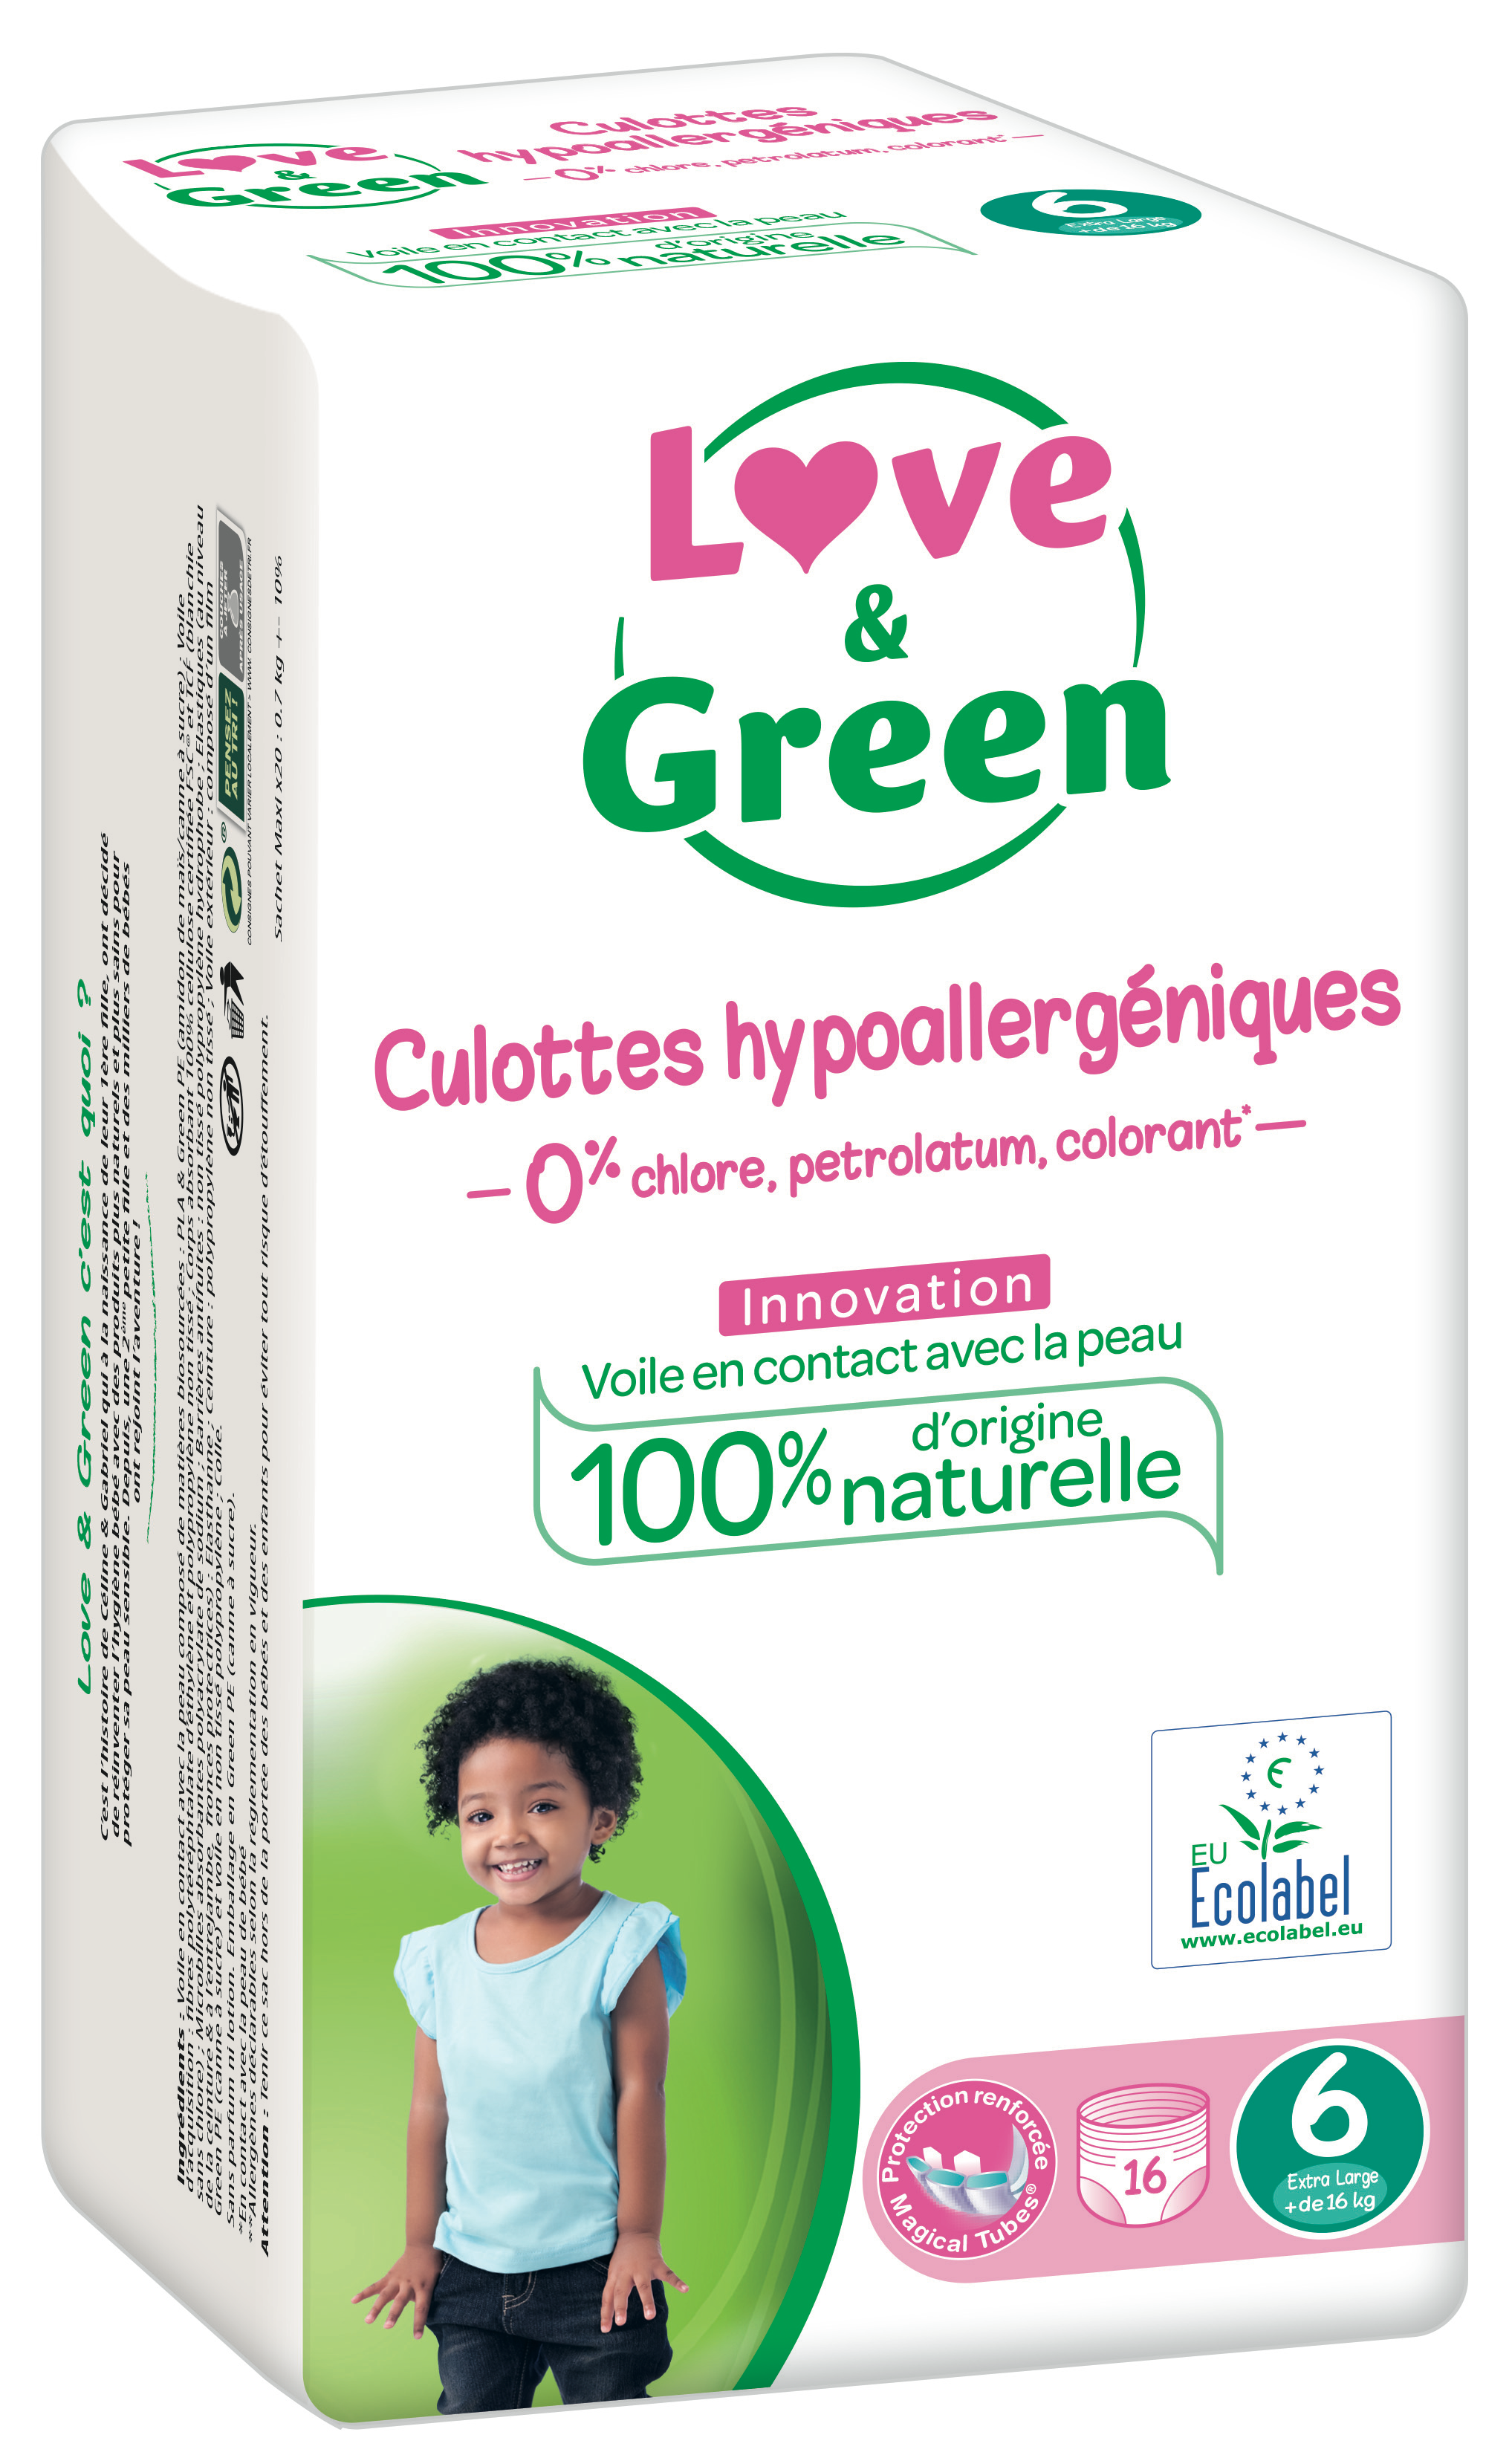 LOVE & GREEN Culottes hypoallergeniques taille 5 18 culottes pas cher 